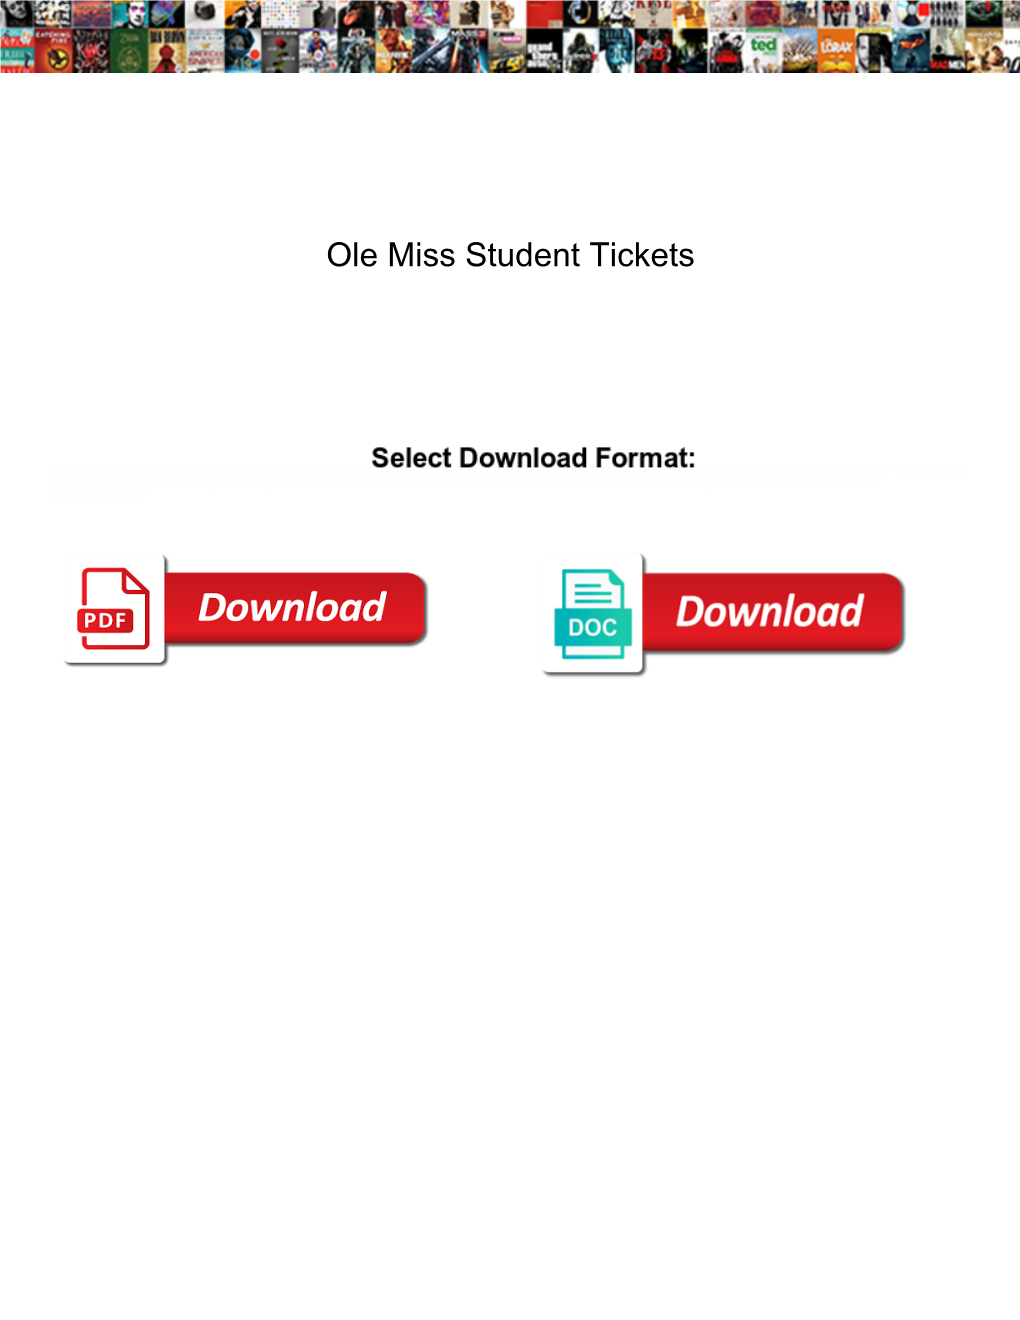 Ole Miss Student Tickets